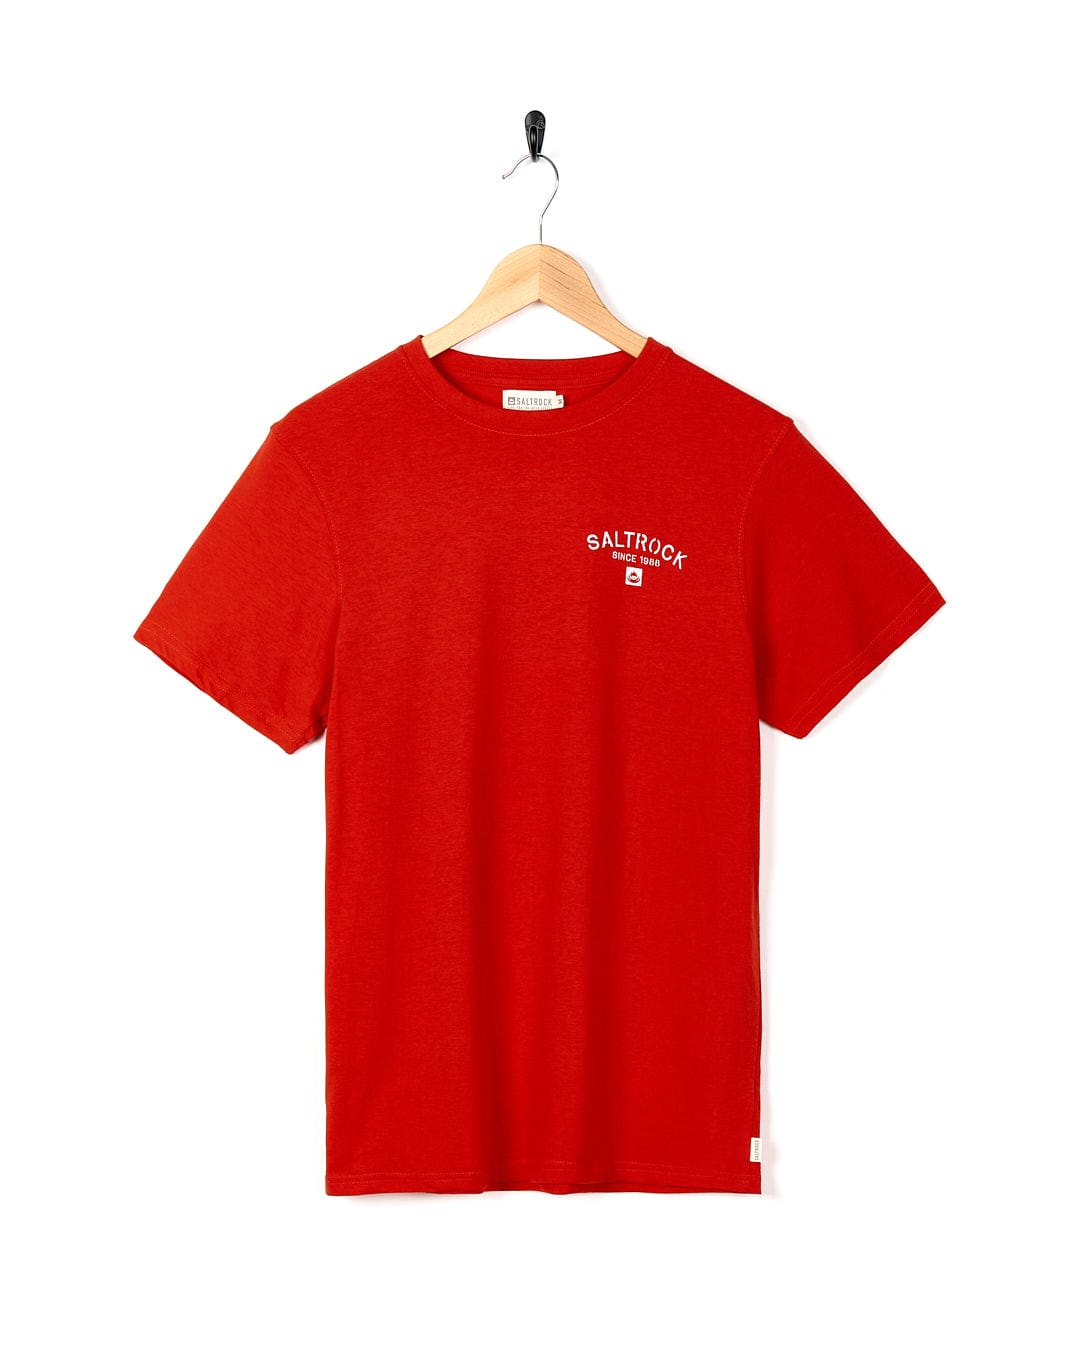 A Stencil - Mens Location T-Shirt - Saunton- Red with a white Saltrock logo on it.